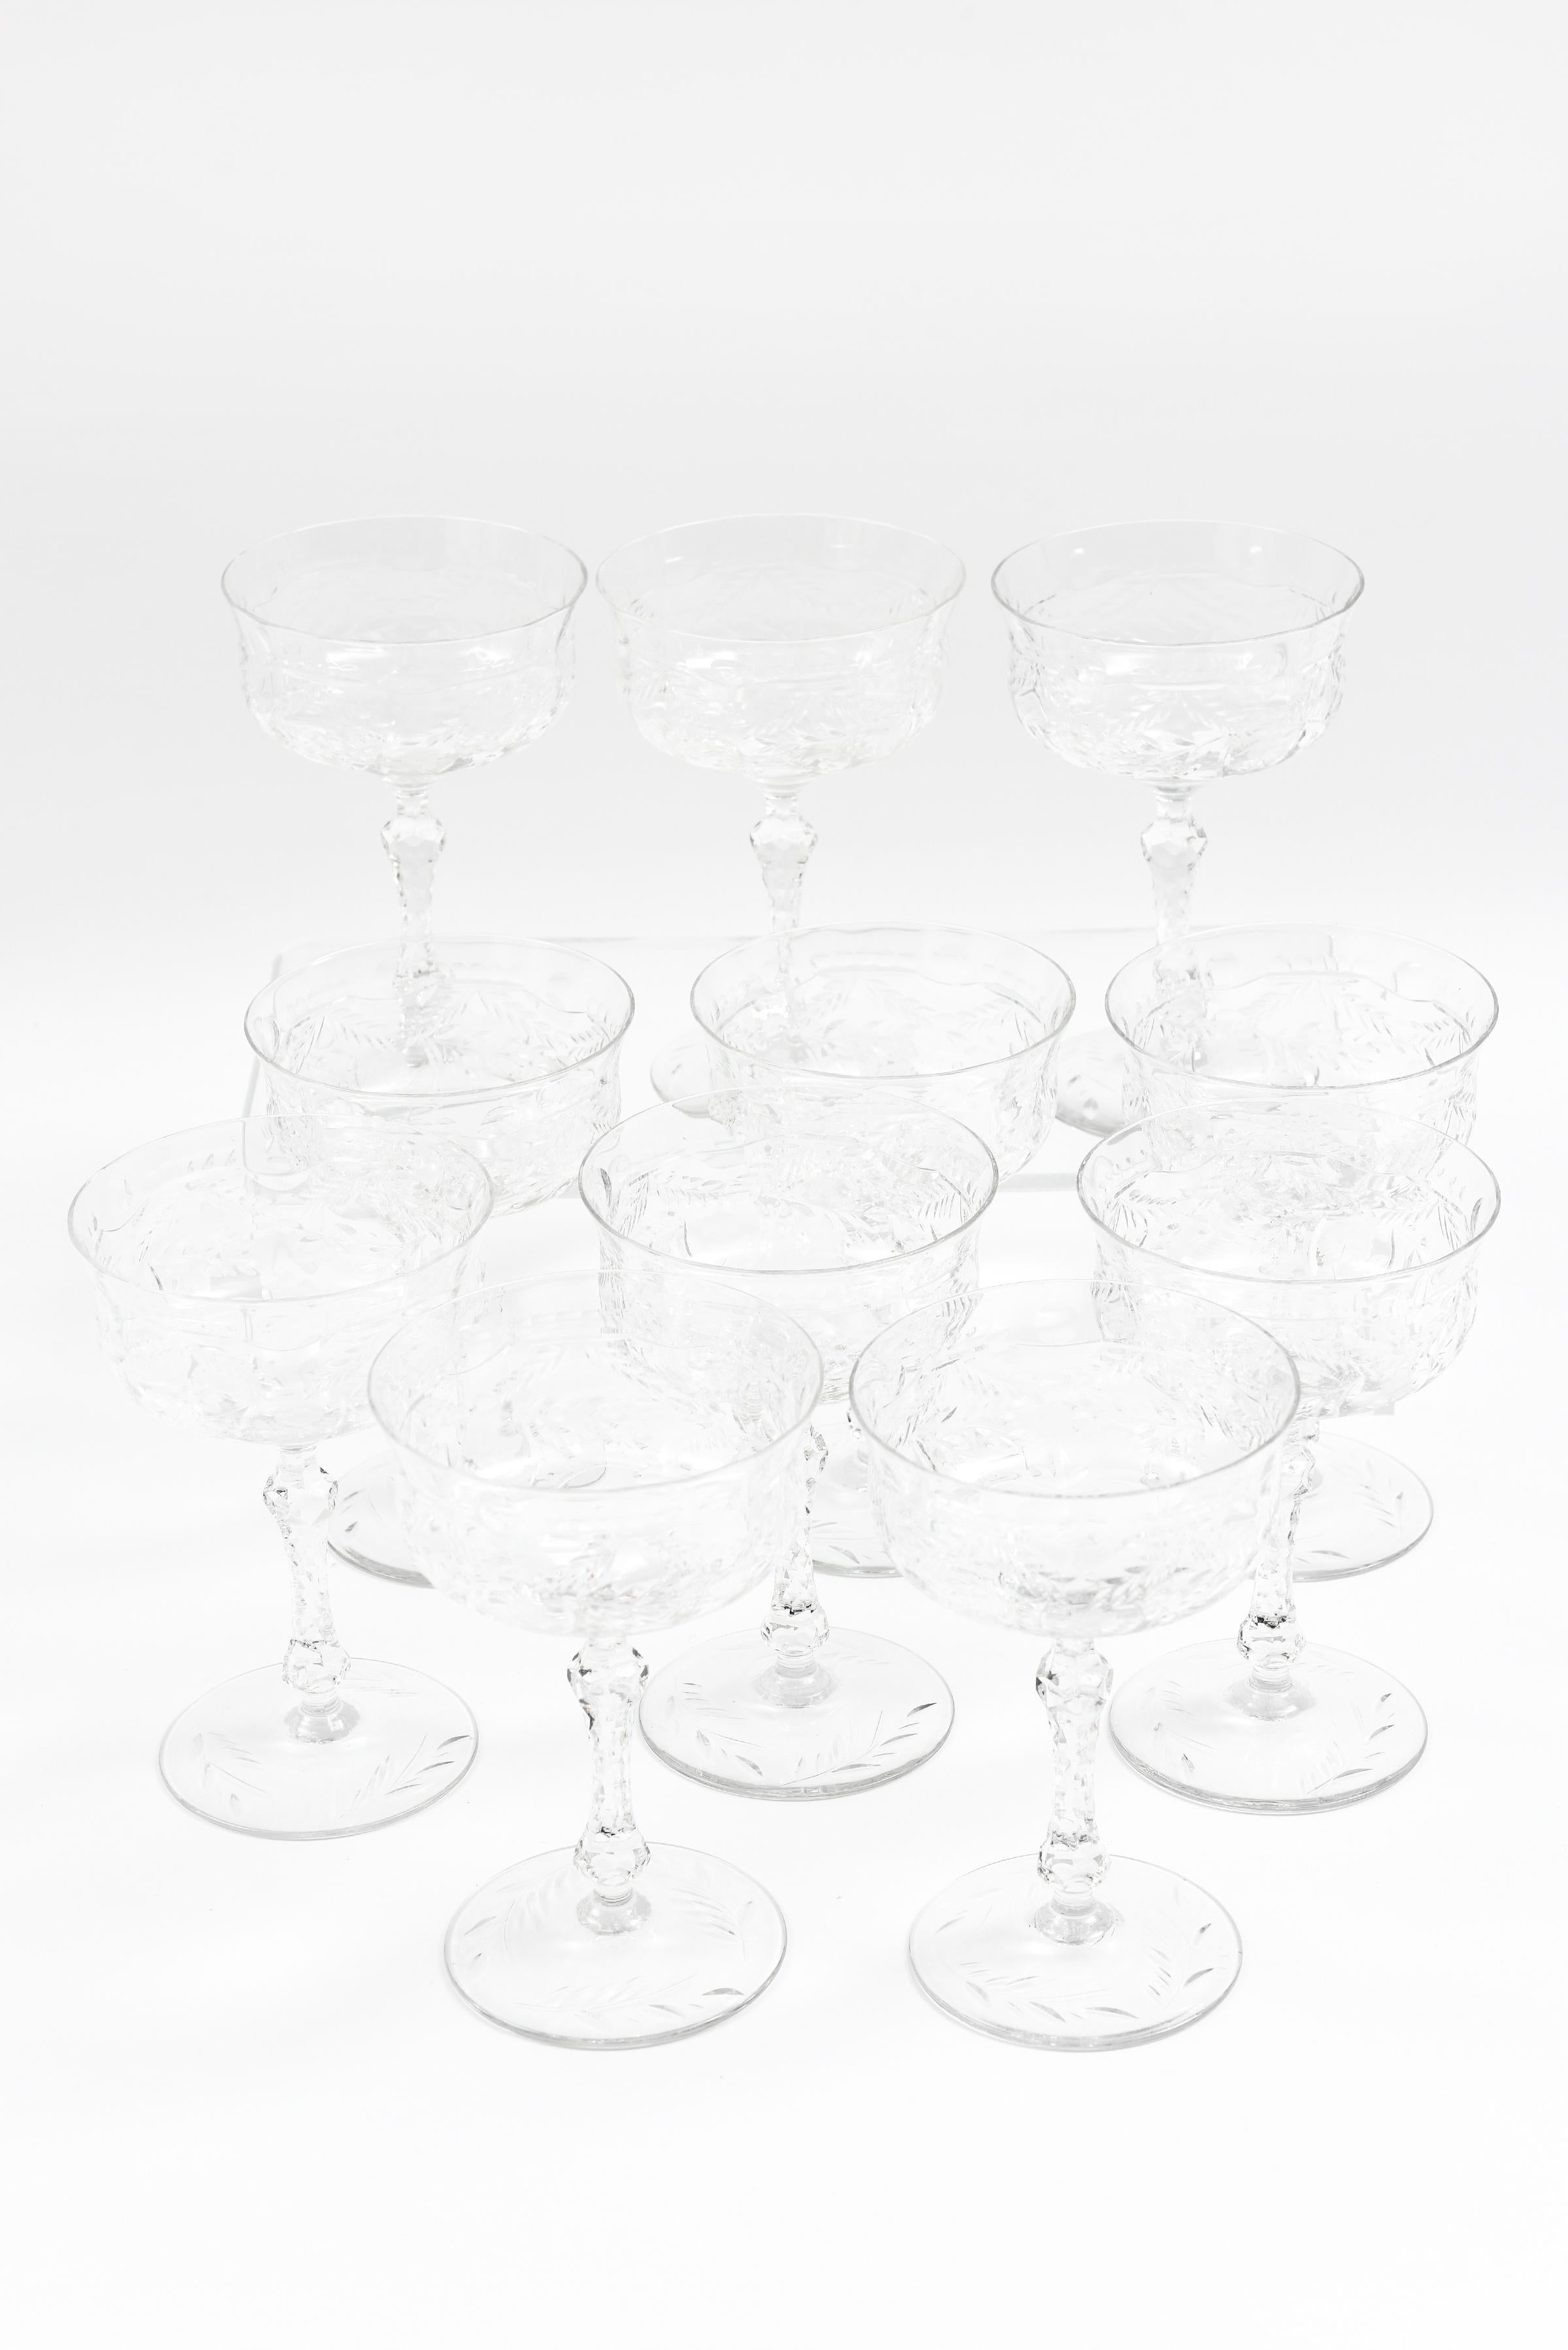 A nicely blown and floral engraved champagne or cocktail glass that has a wonderful cut knob stem that is a delight to hold. A generous sized bowl for champagne, cocktails, sorbet, ice cream and so much more. The height is perfect for service and